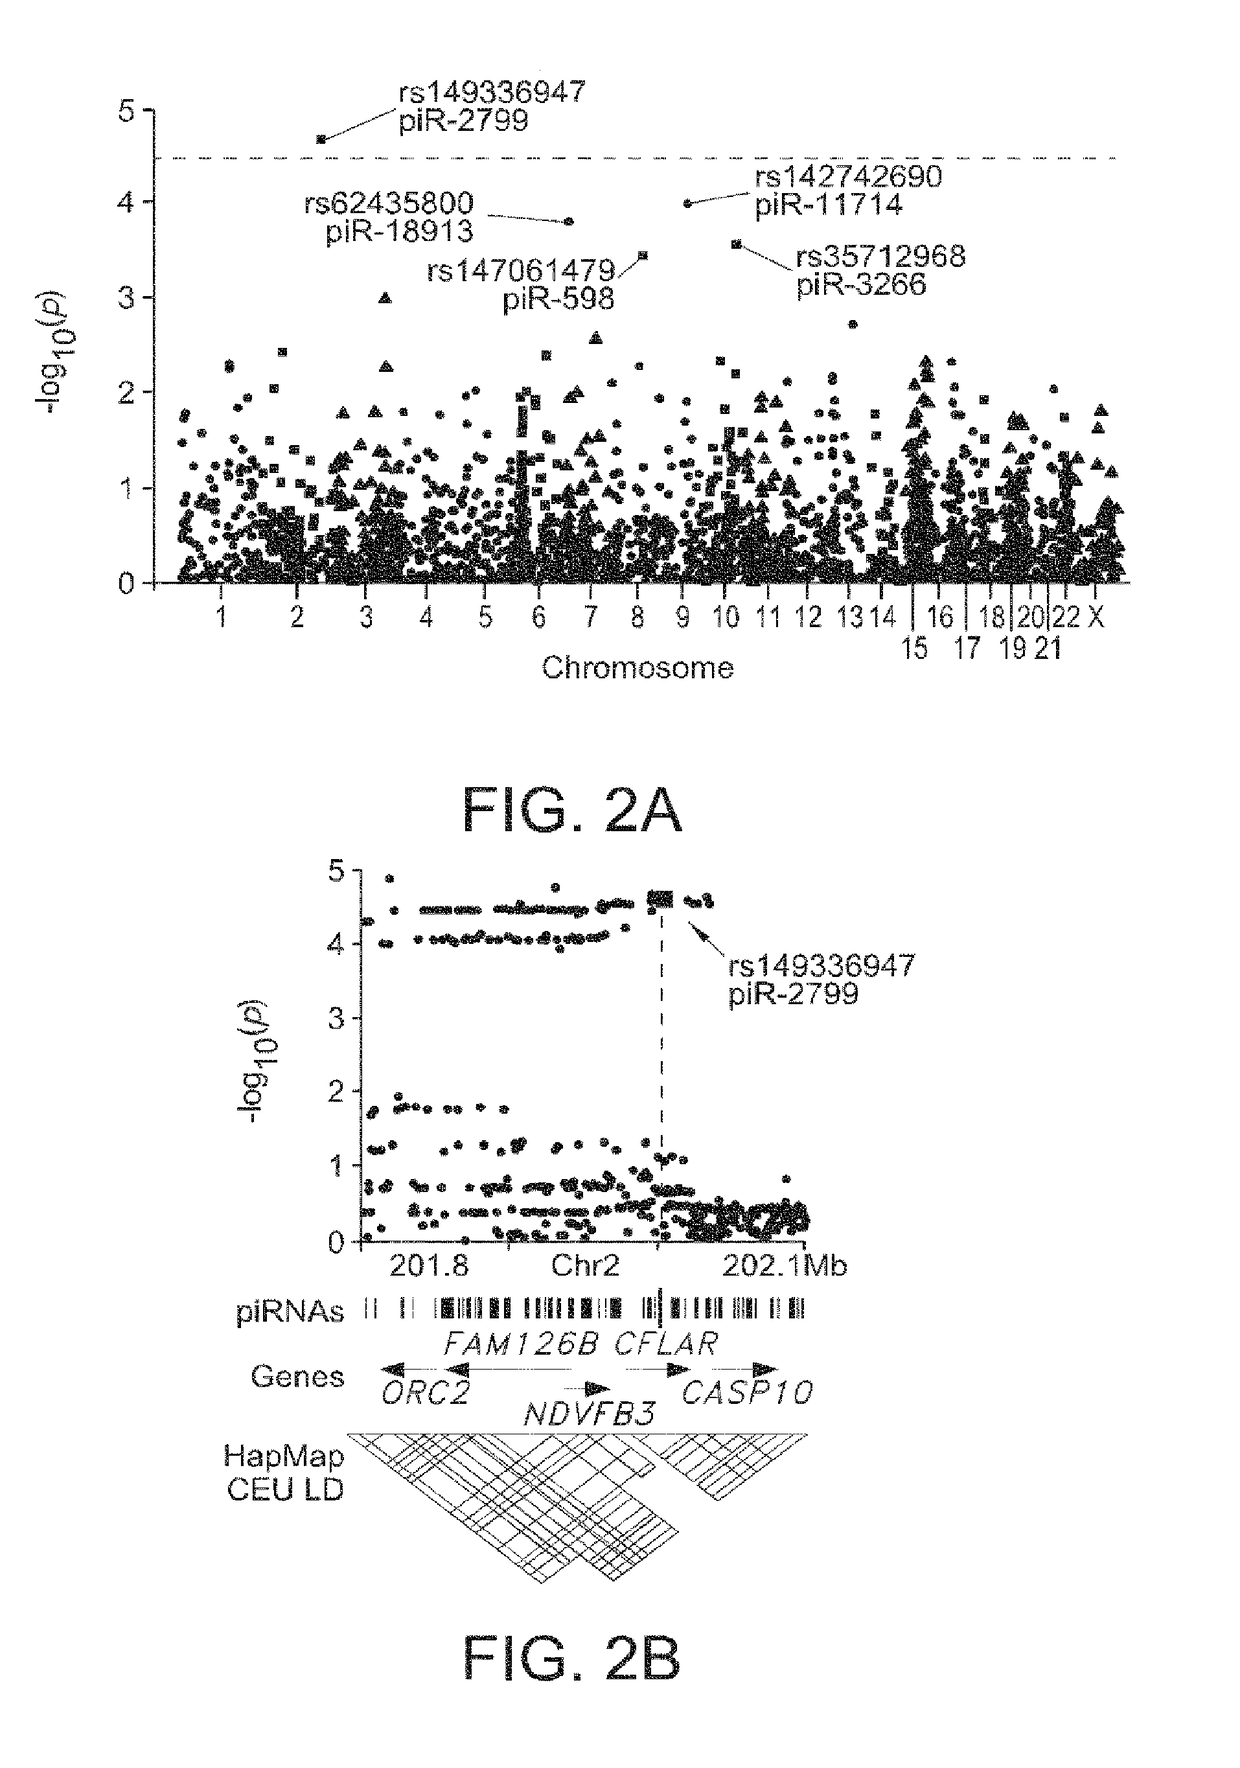 COMPOSITIONS AND METHODS OF USING piRNAS IN CANCER DIAGNOSTICS AND THERAPEUTICS